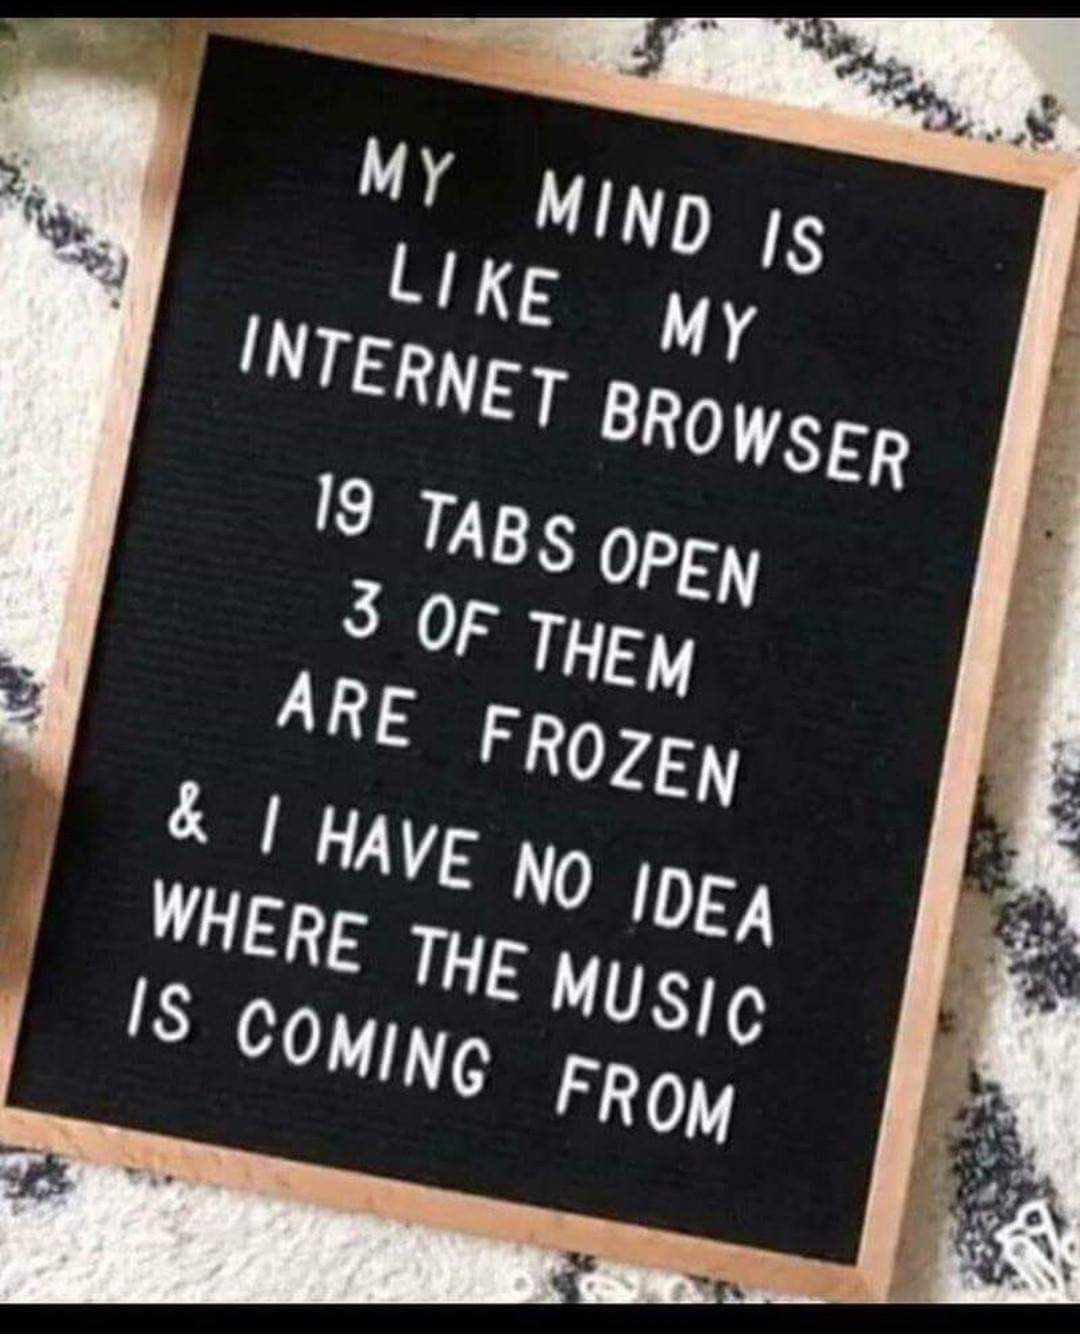 And there's weird porn in 7 tabs.